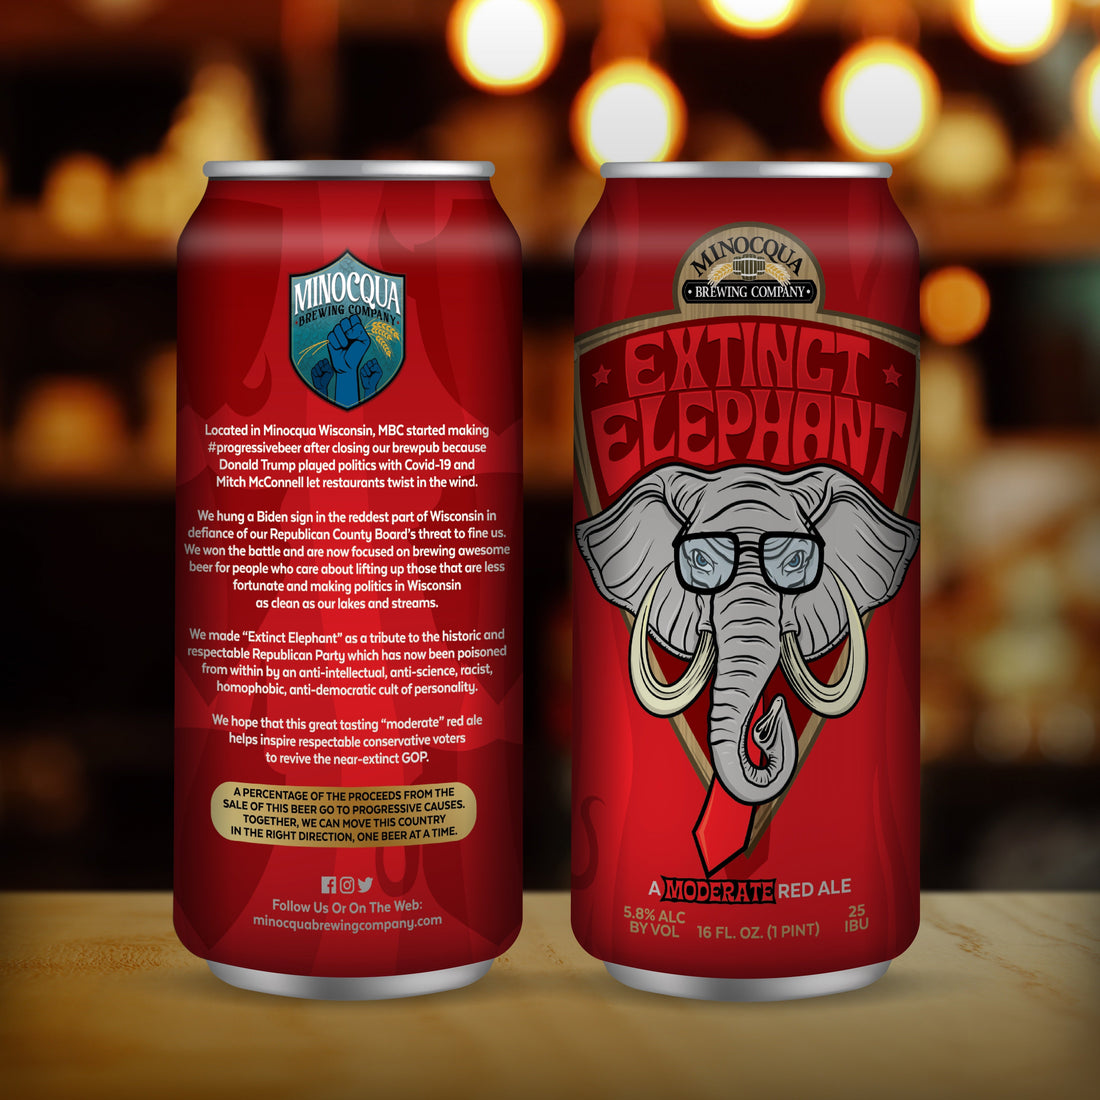 Introducing Extinct Elephant:  A Moderate Red Ale